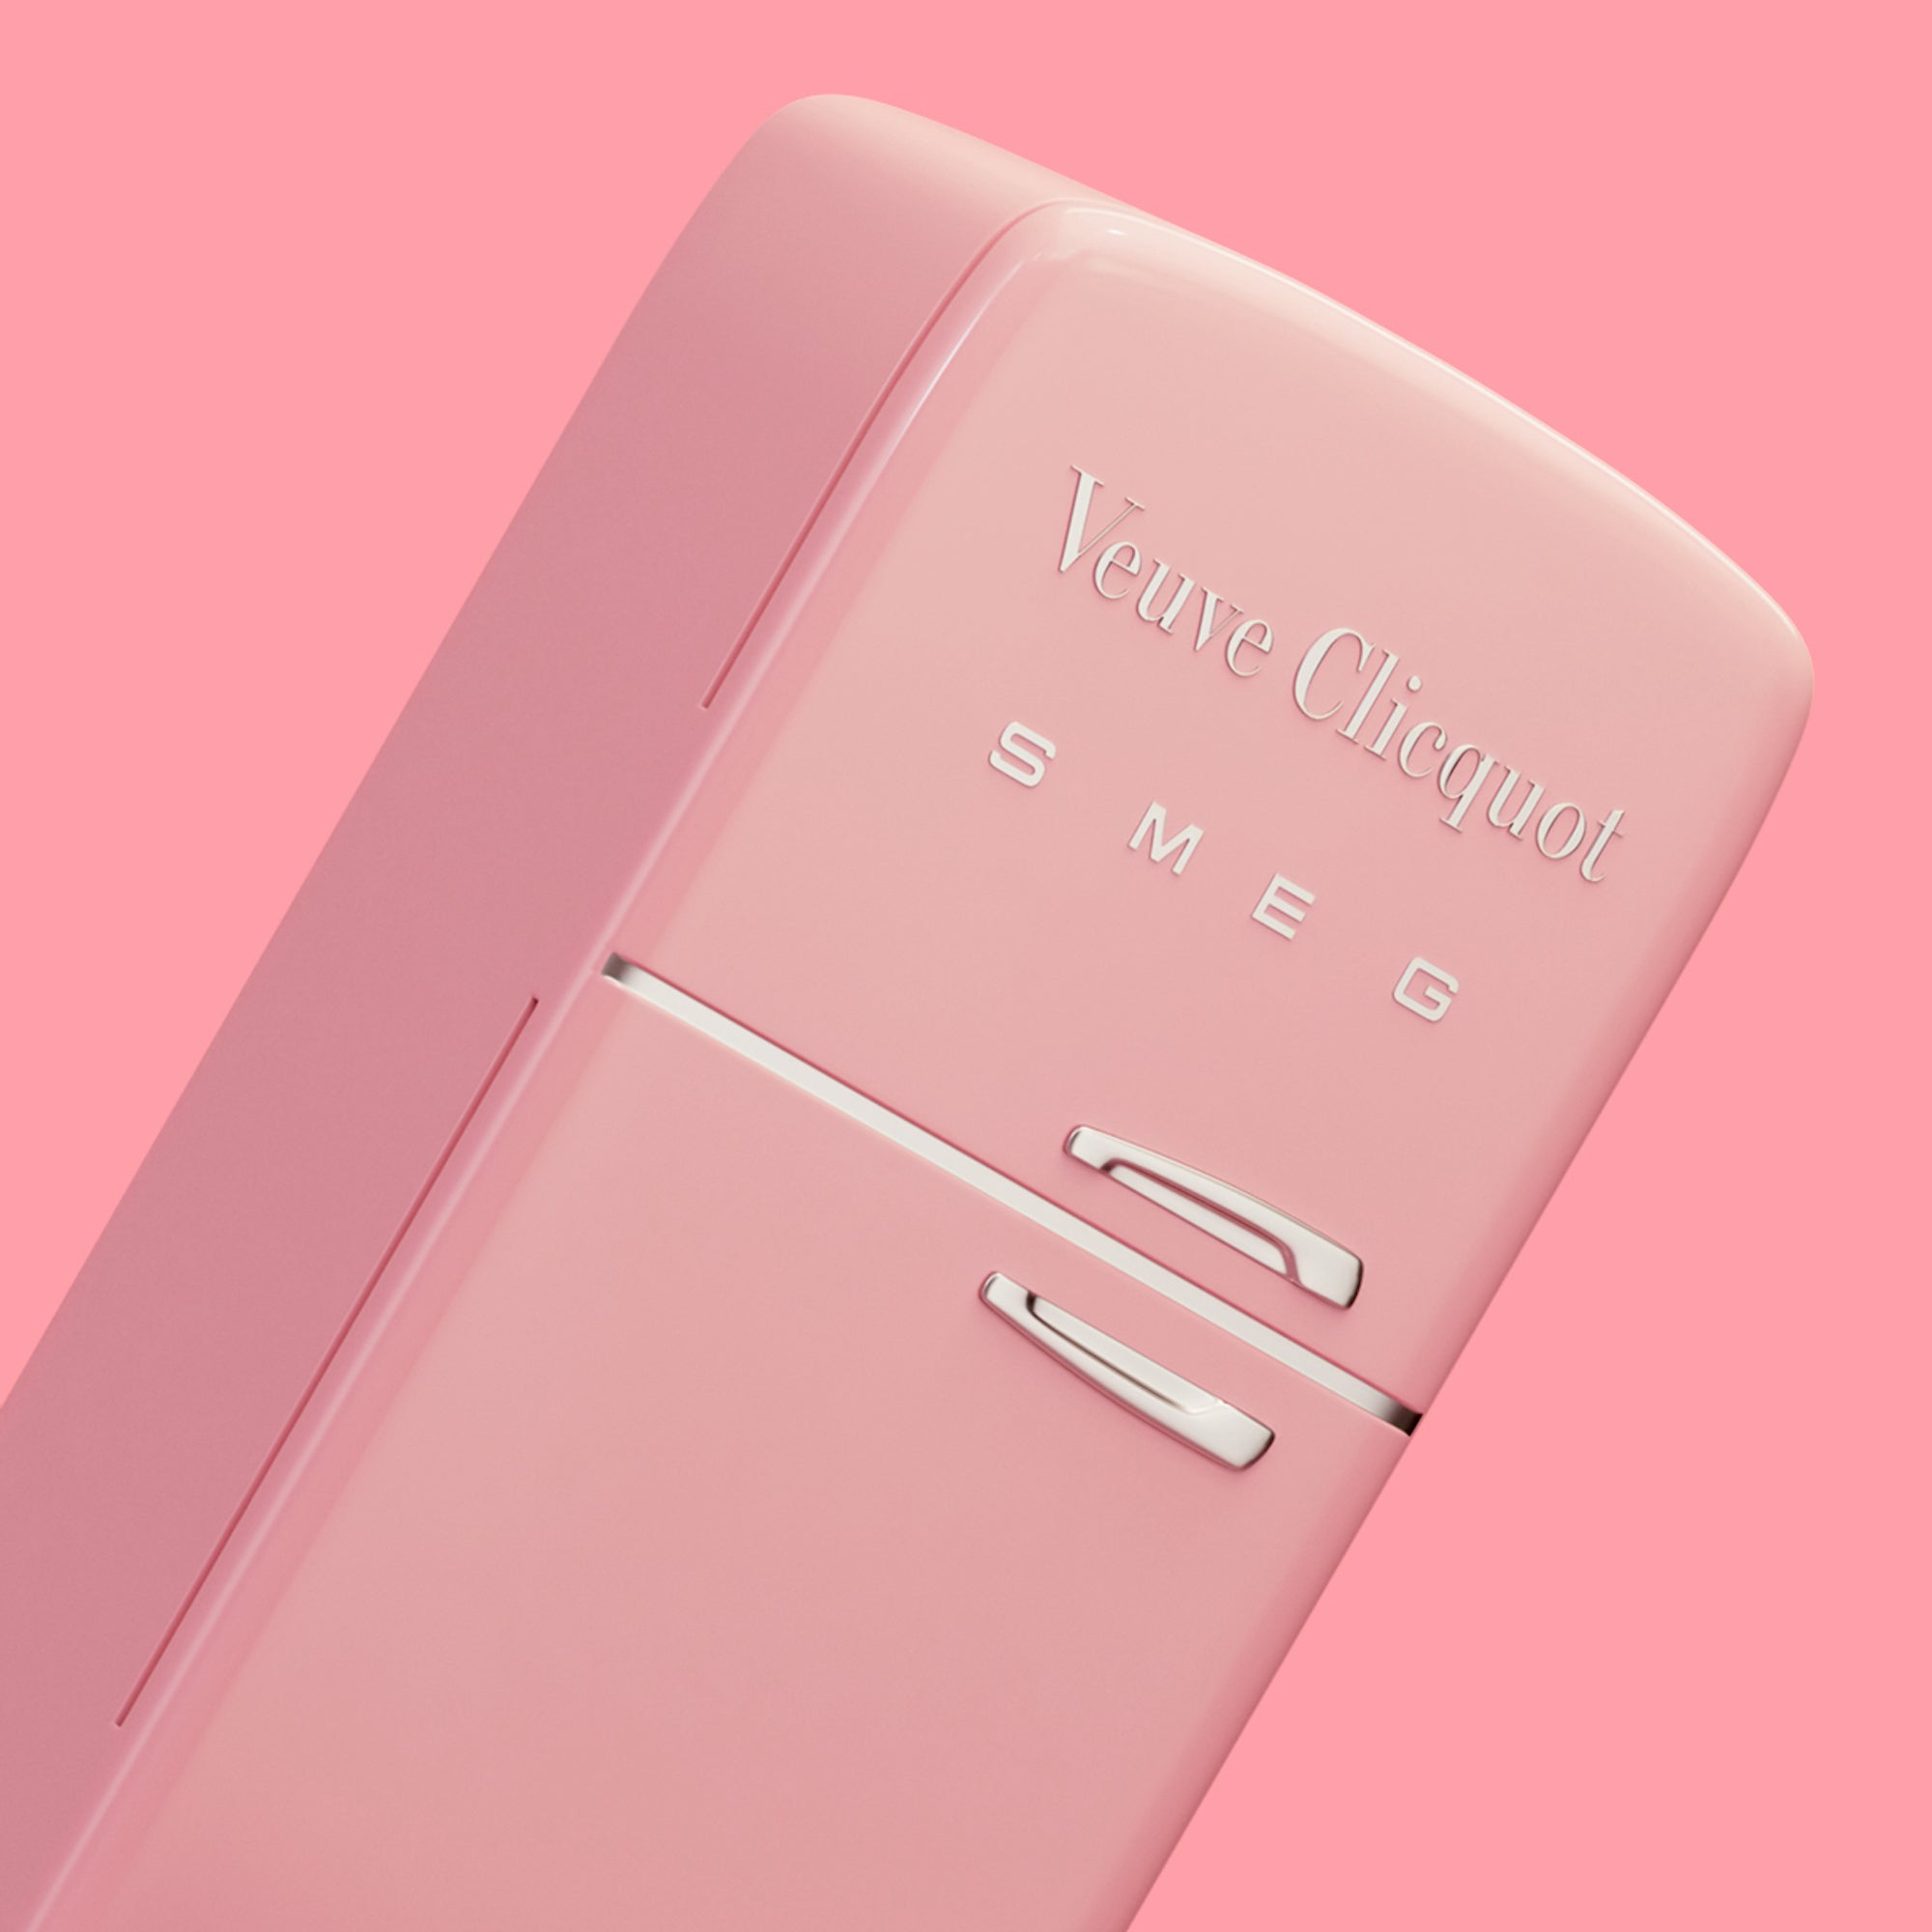 Smeg and Veuve Clicquot team up on a limited edition fridge